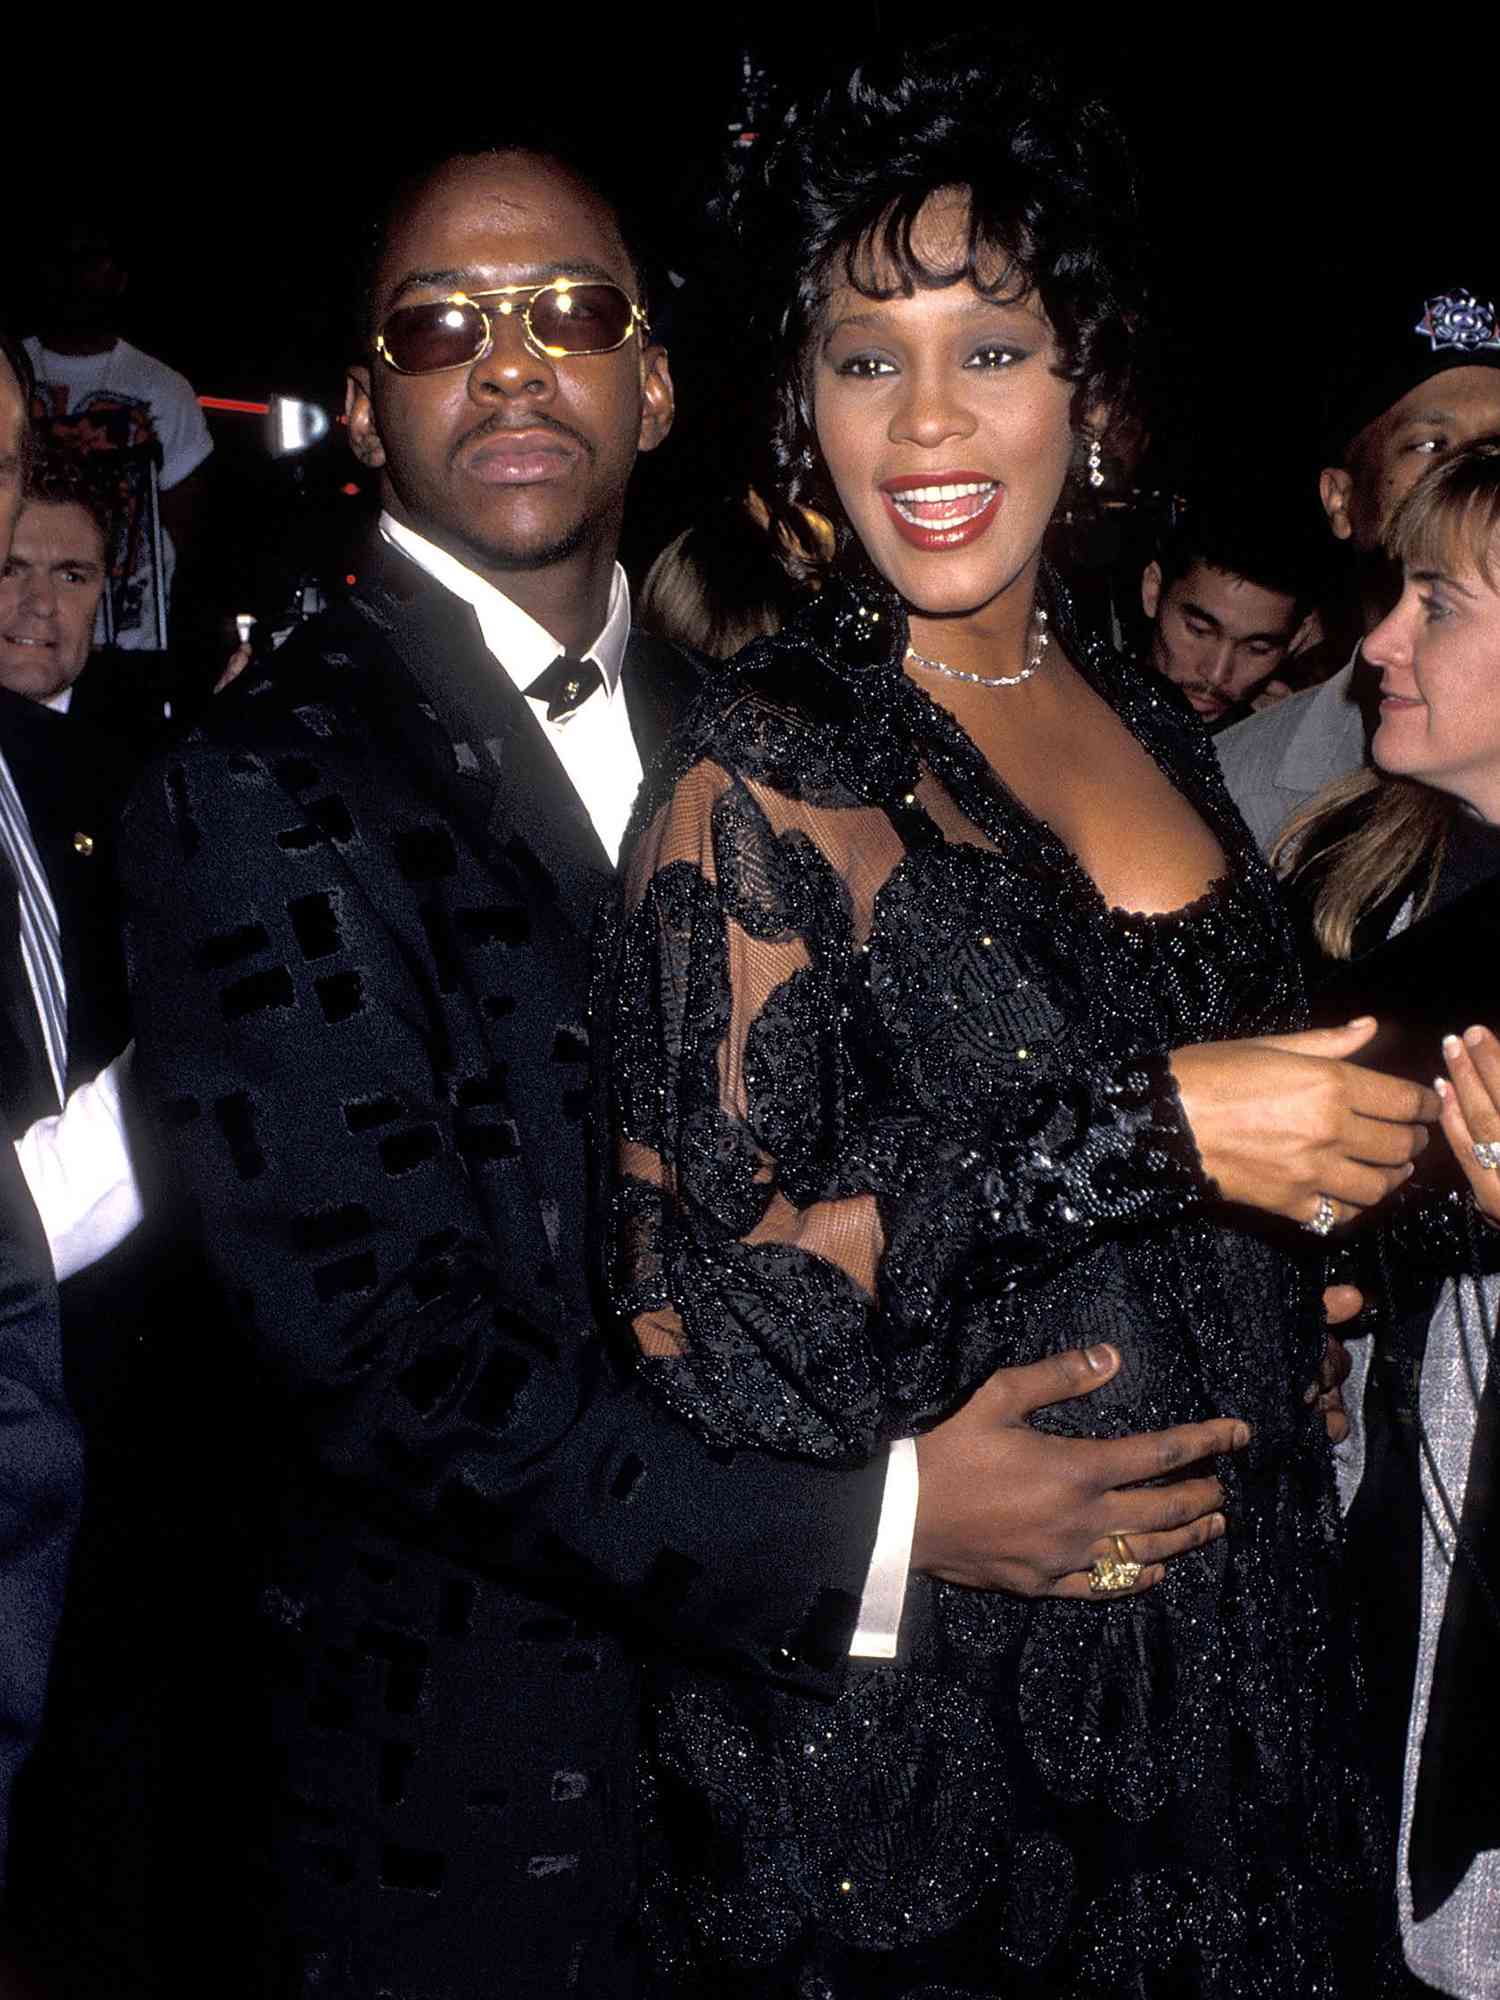 Bobby Brown and singer Whitney Houston attend "The Bodyguard" Hollywood Premiere on November 23, 1992 at Mann's Chinese Theatre in Hollywood, California